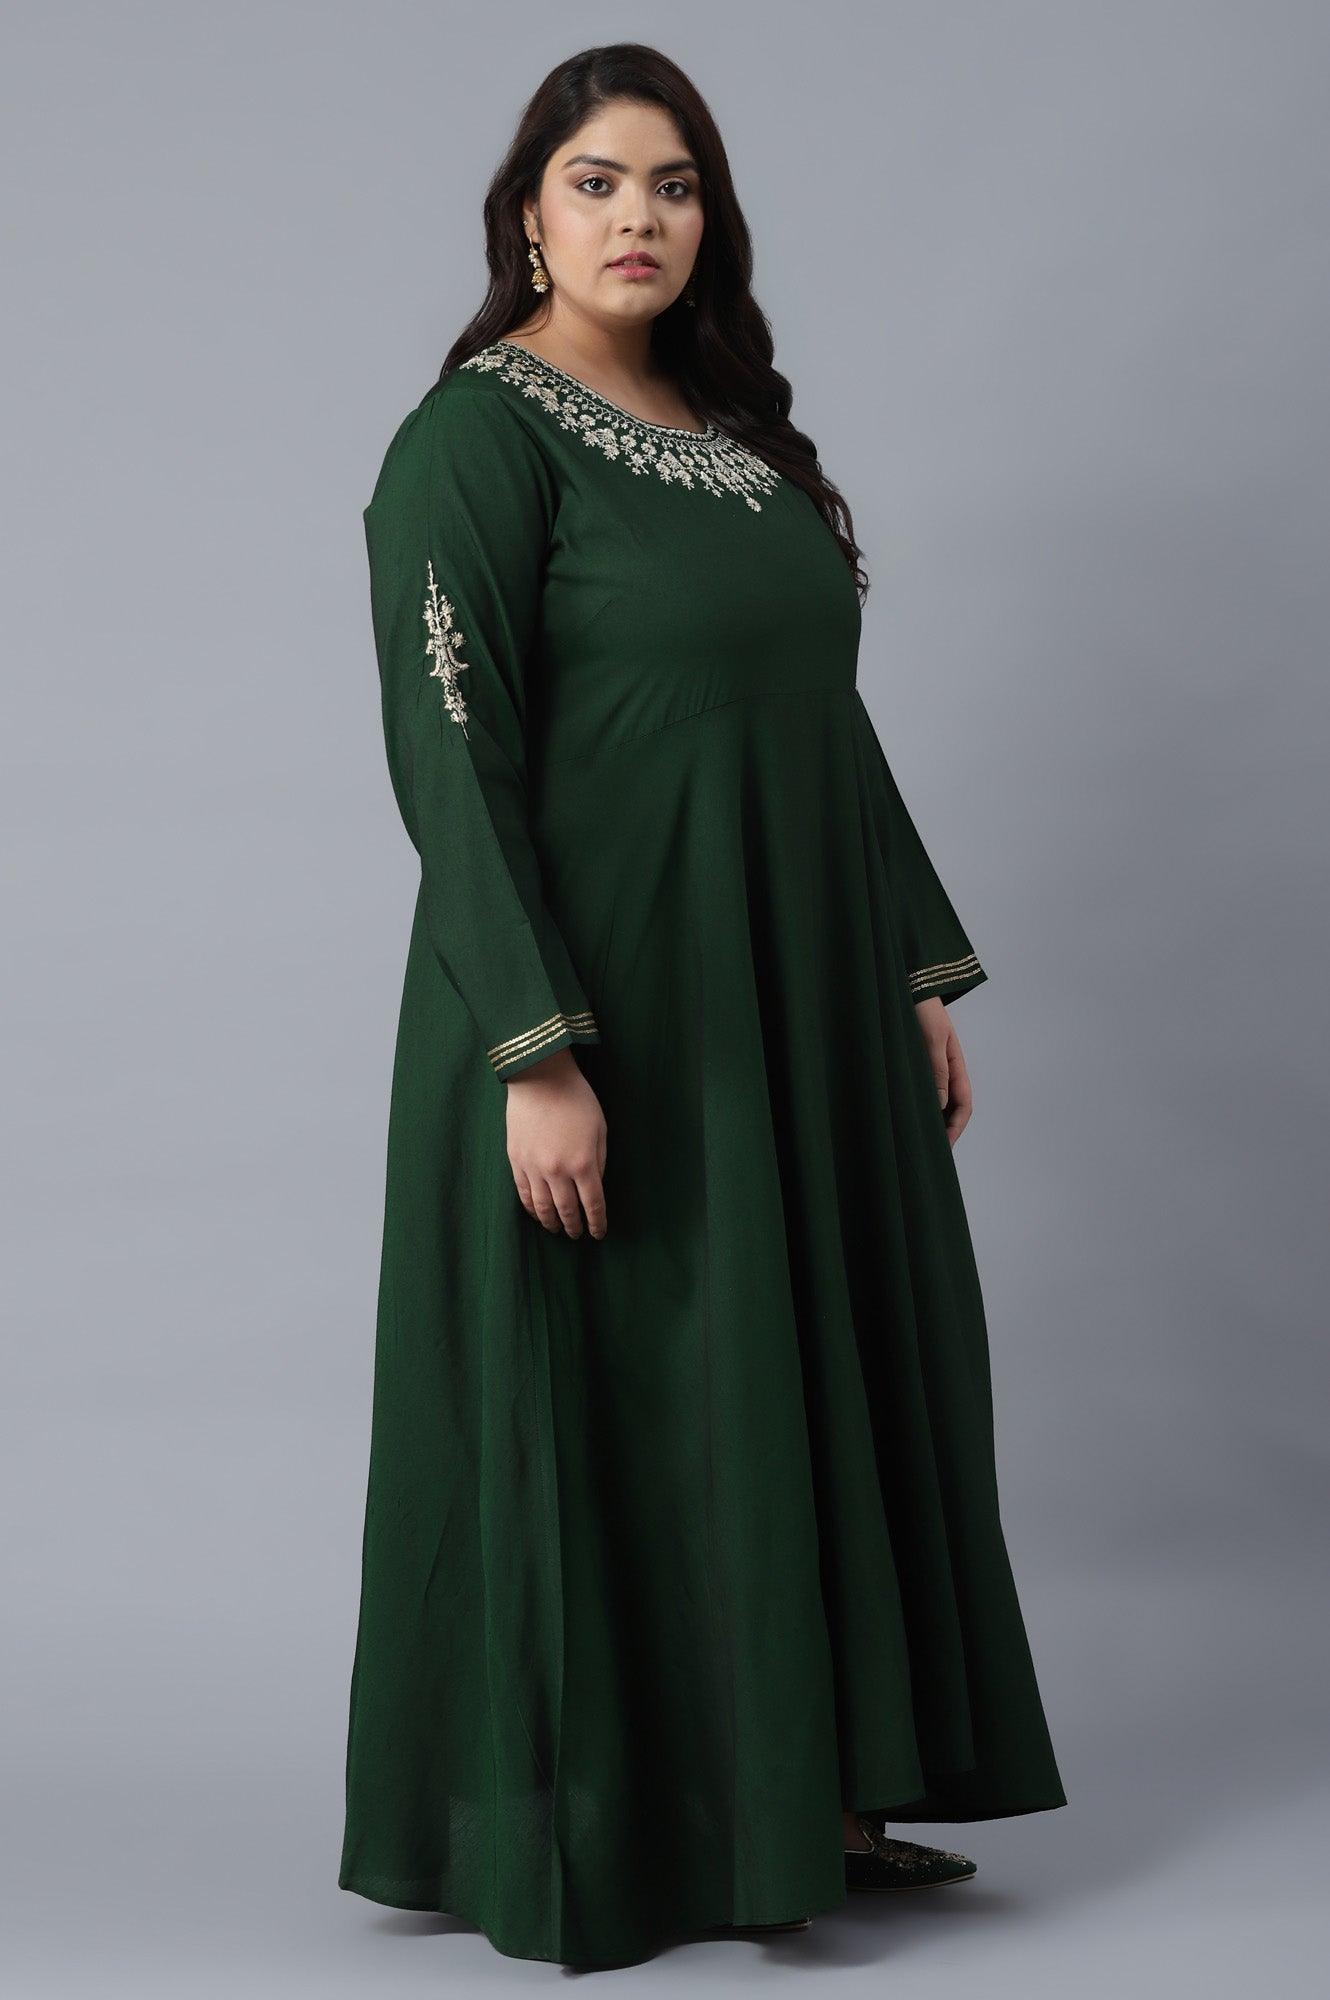 Bottle Green Dress with Embroidery - wforwoman